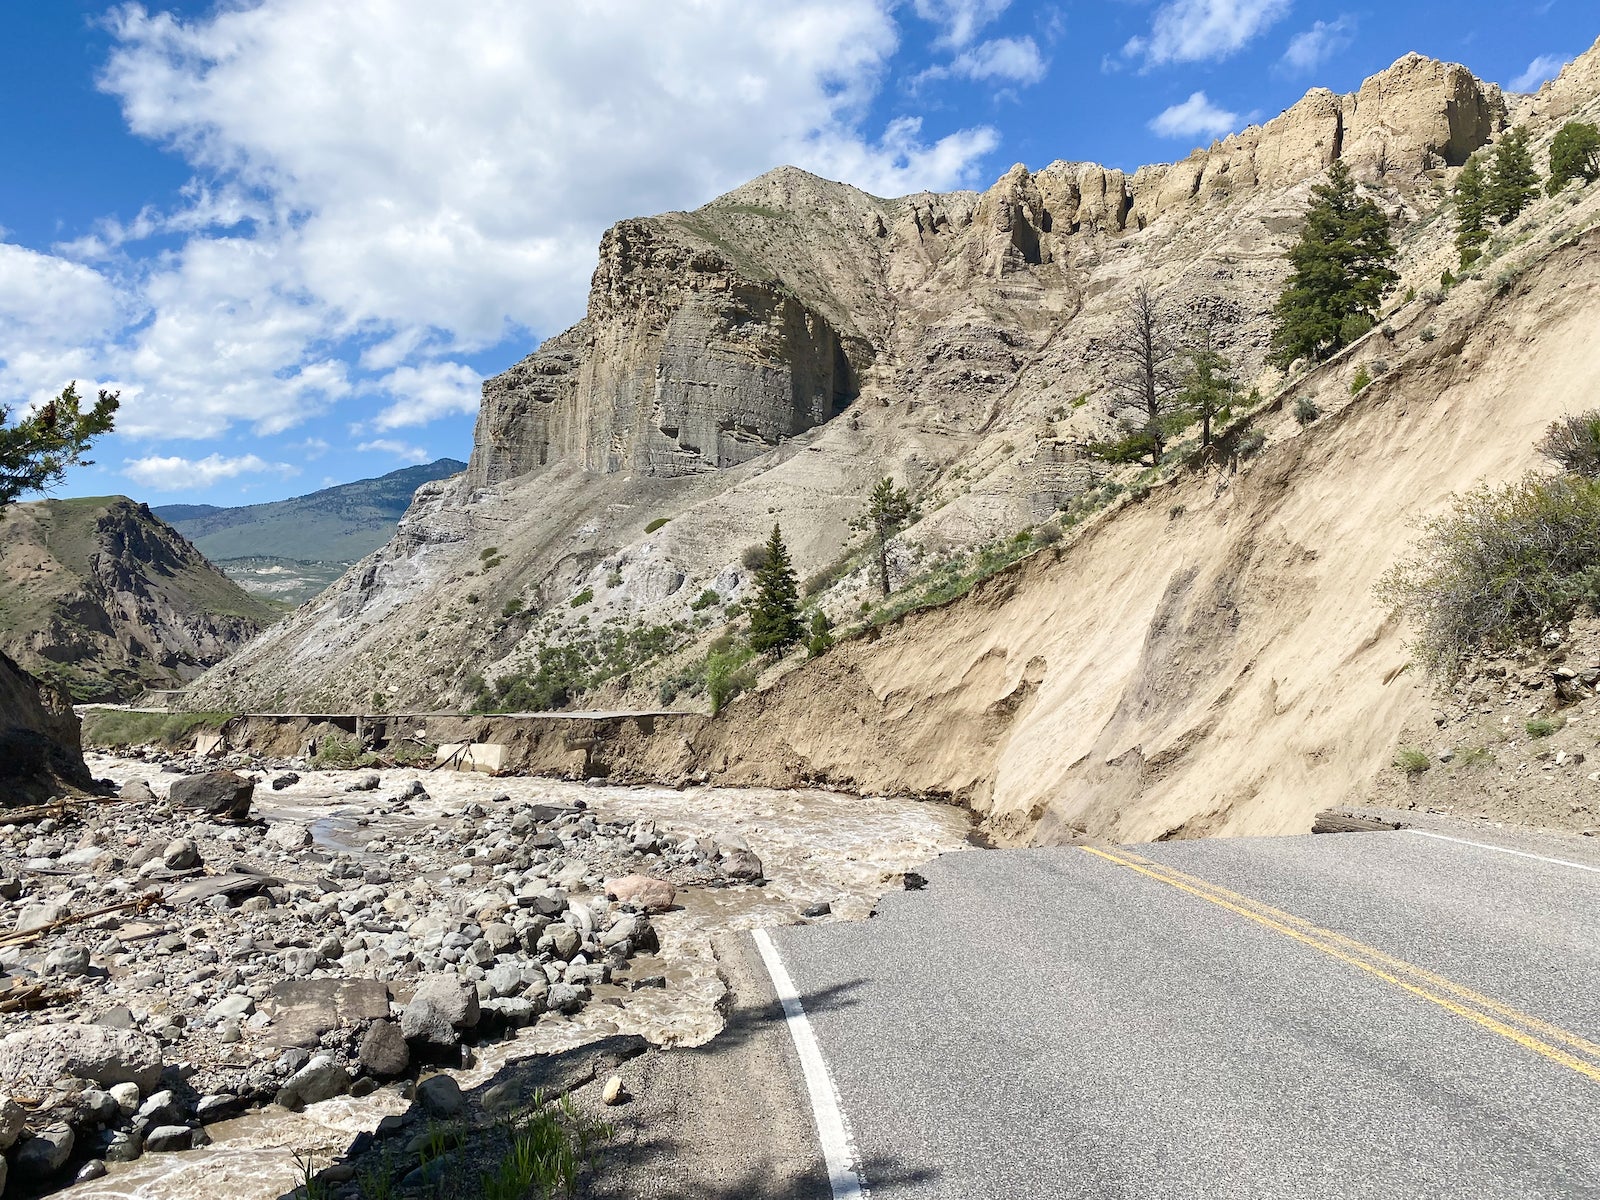 Flooding Temporarily Closes Yellowstone National Park